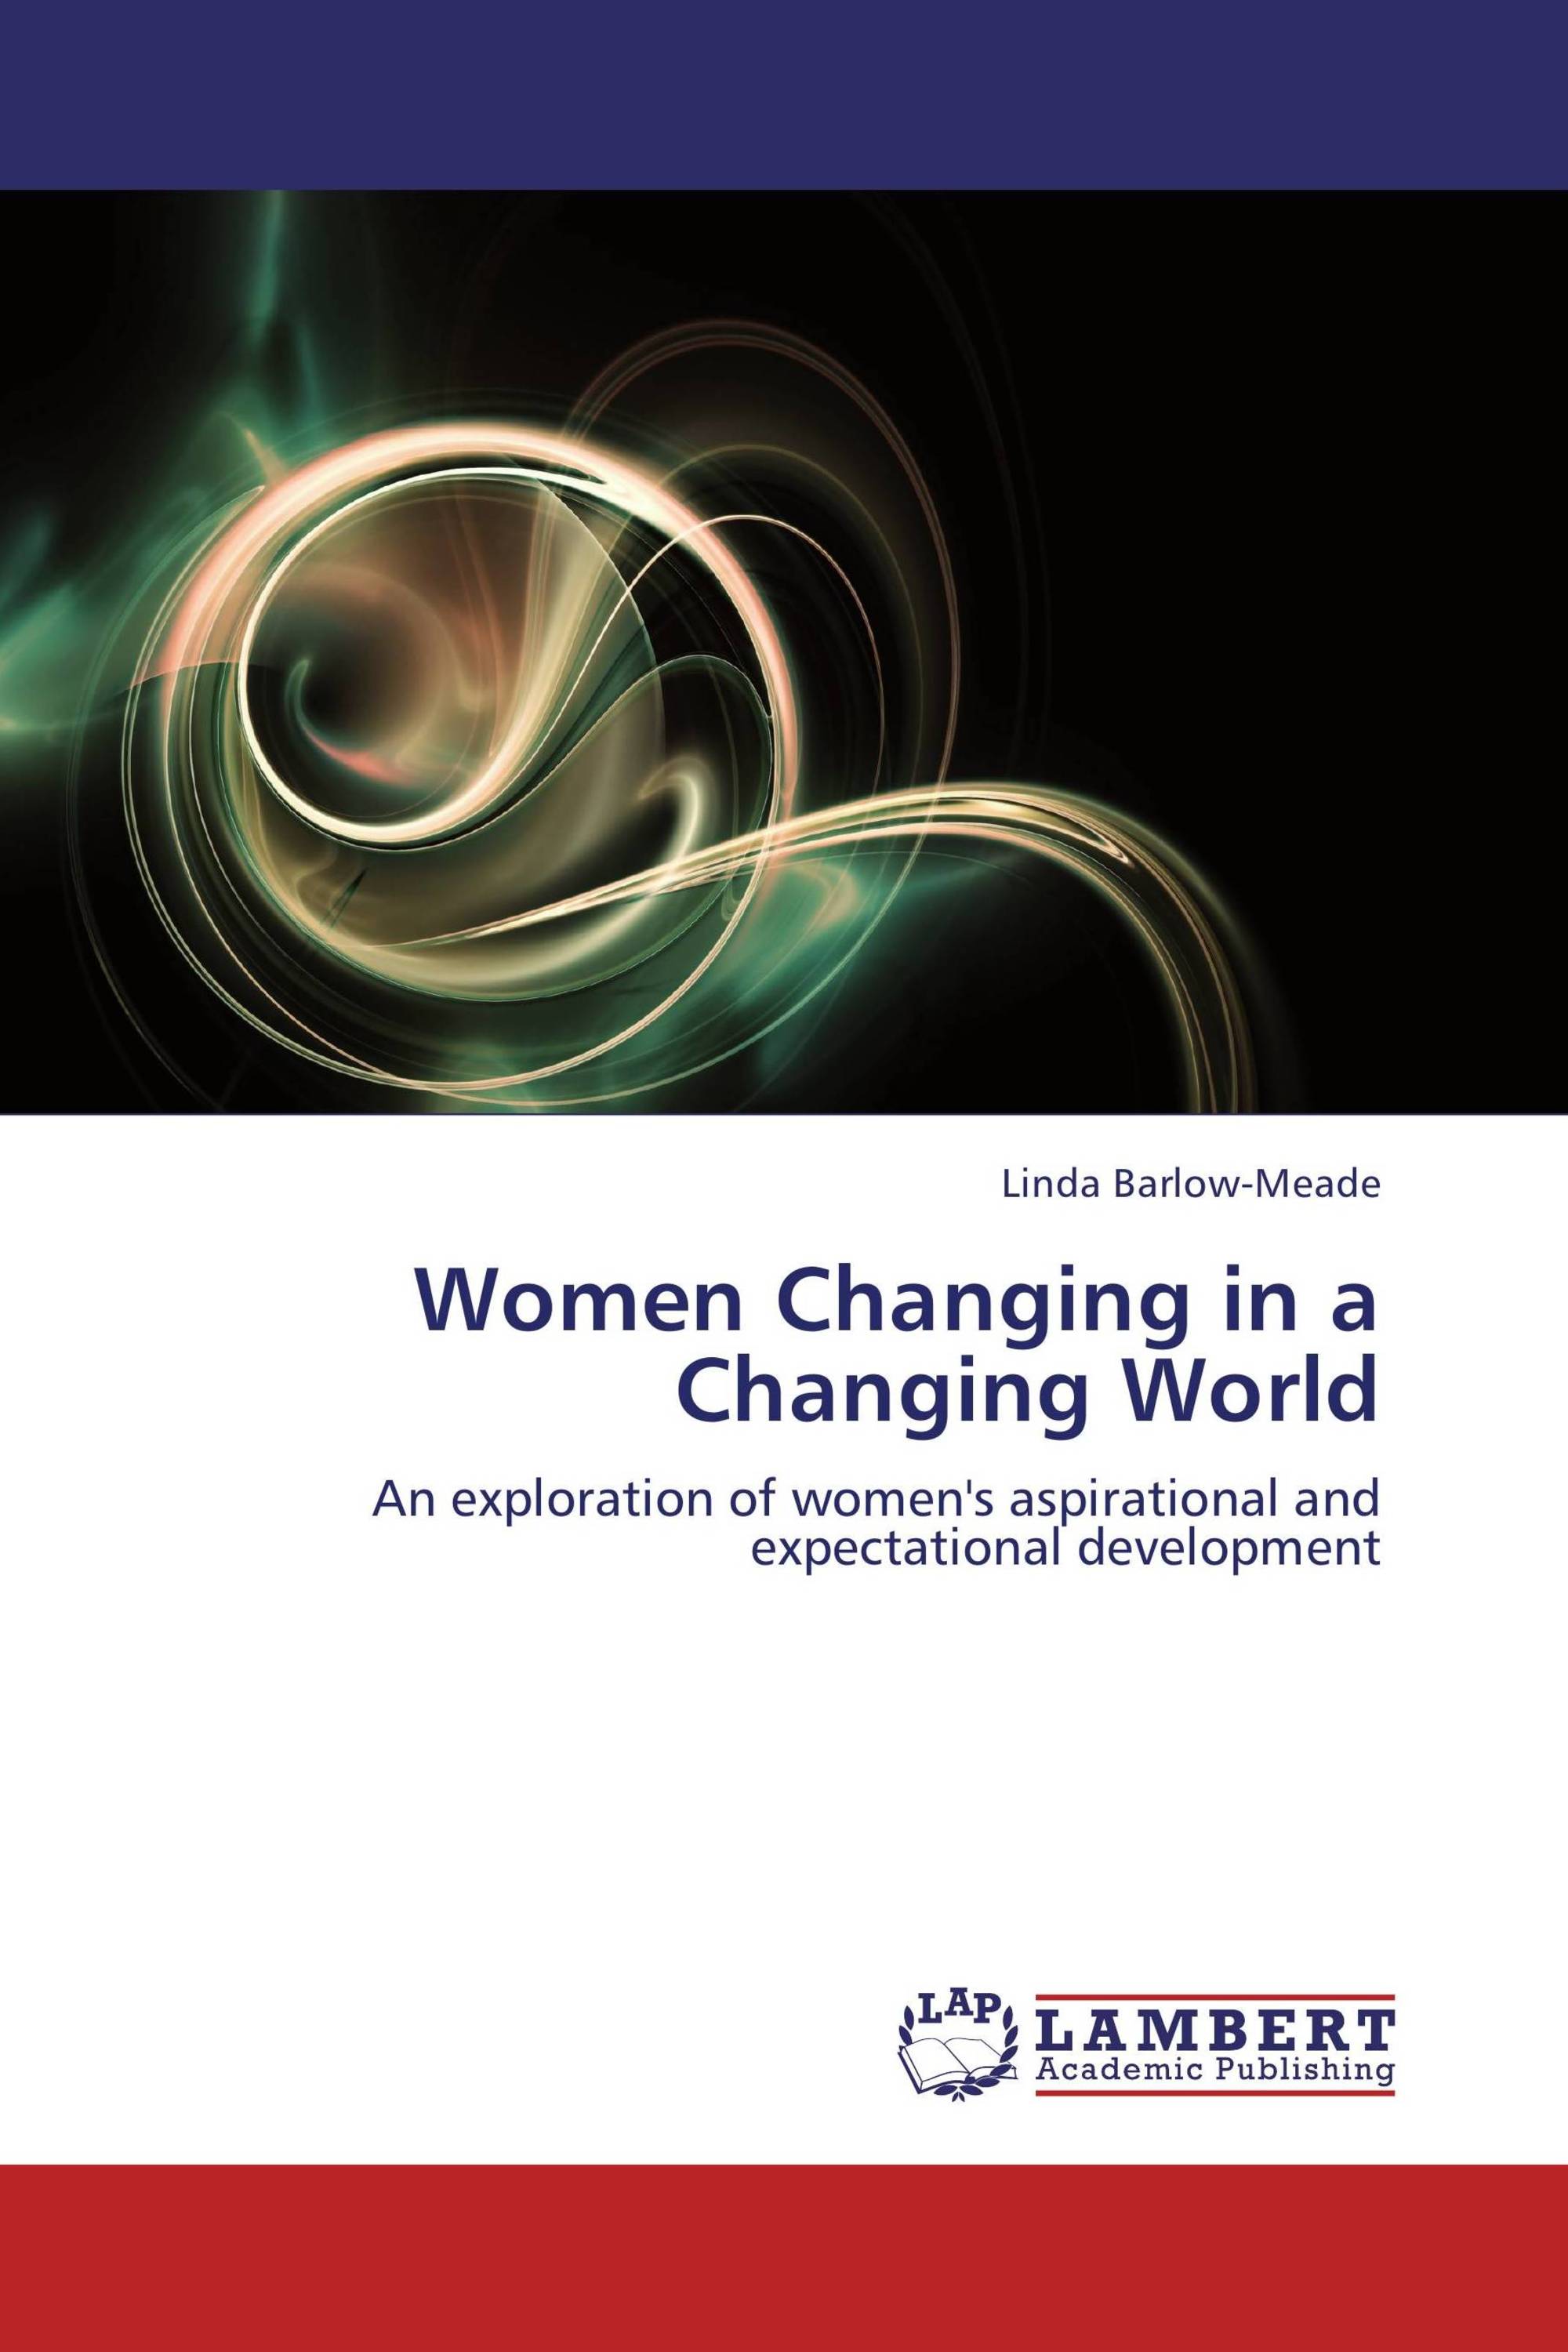 Women Changing in a Changing World